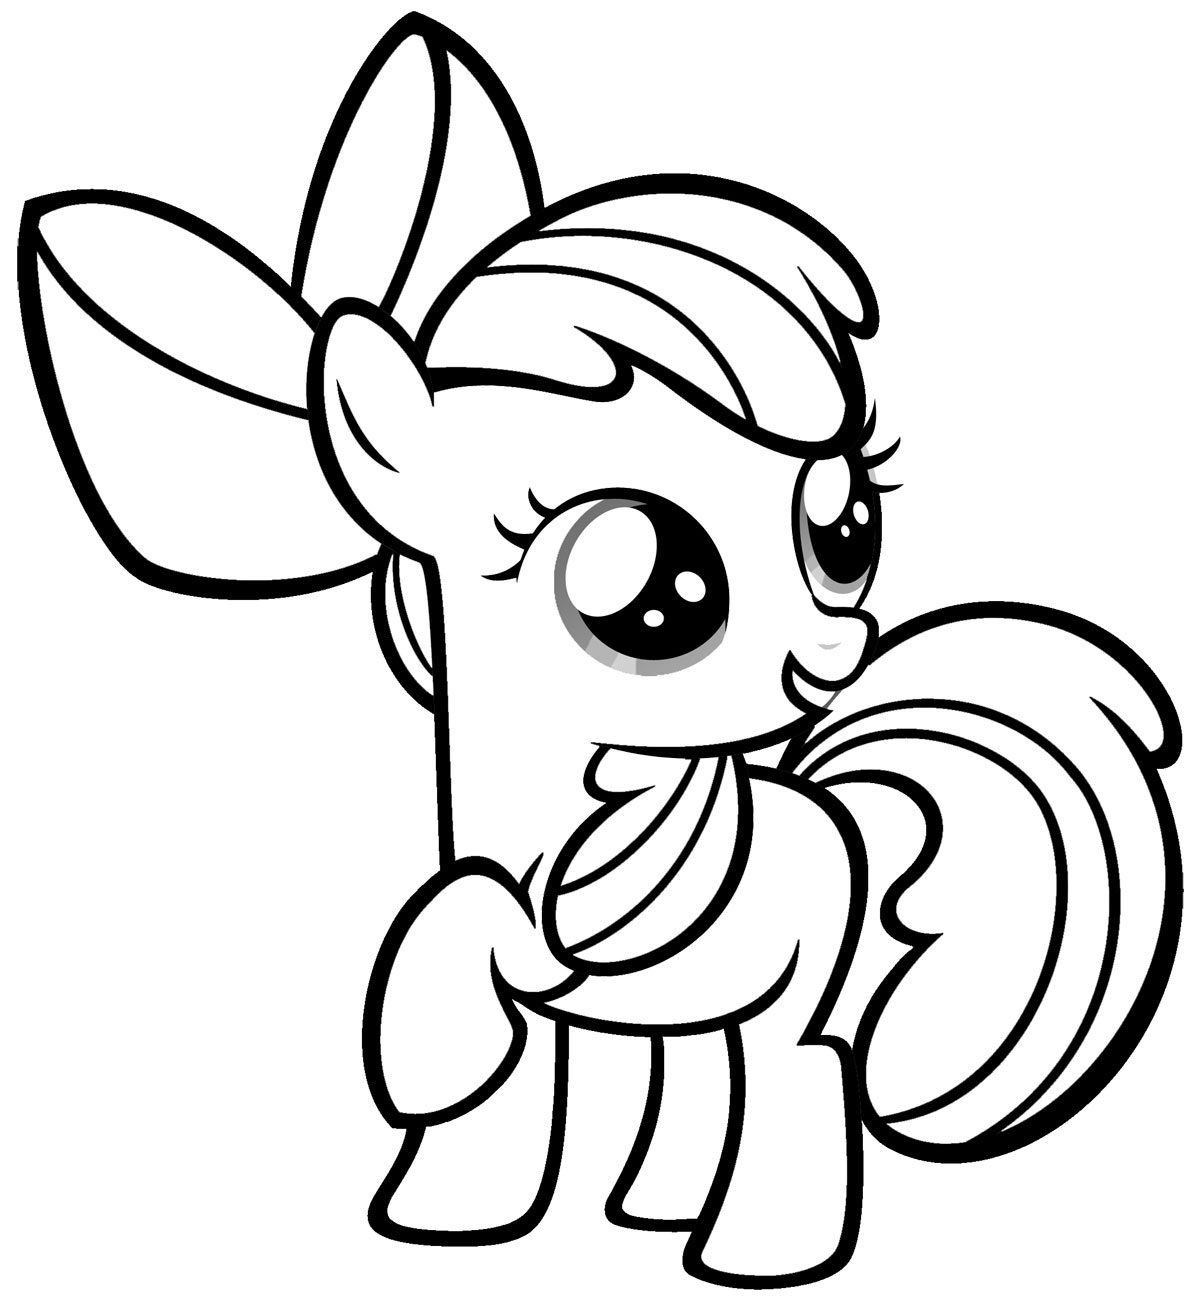 Kids Coloring Pages My Little Pony
 Free Printable My Little Pony Coloring Pages For Kids